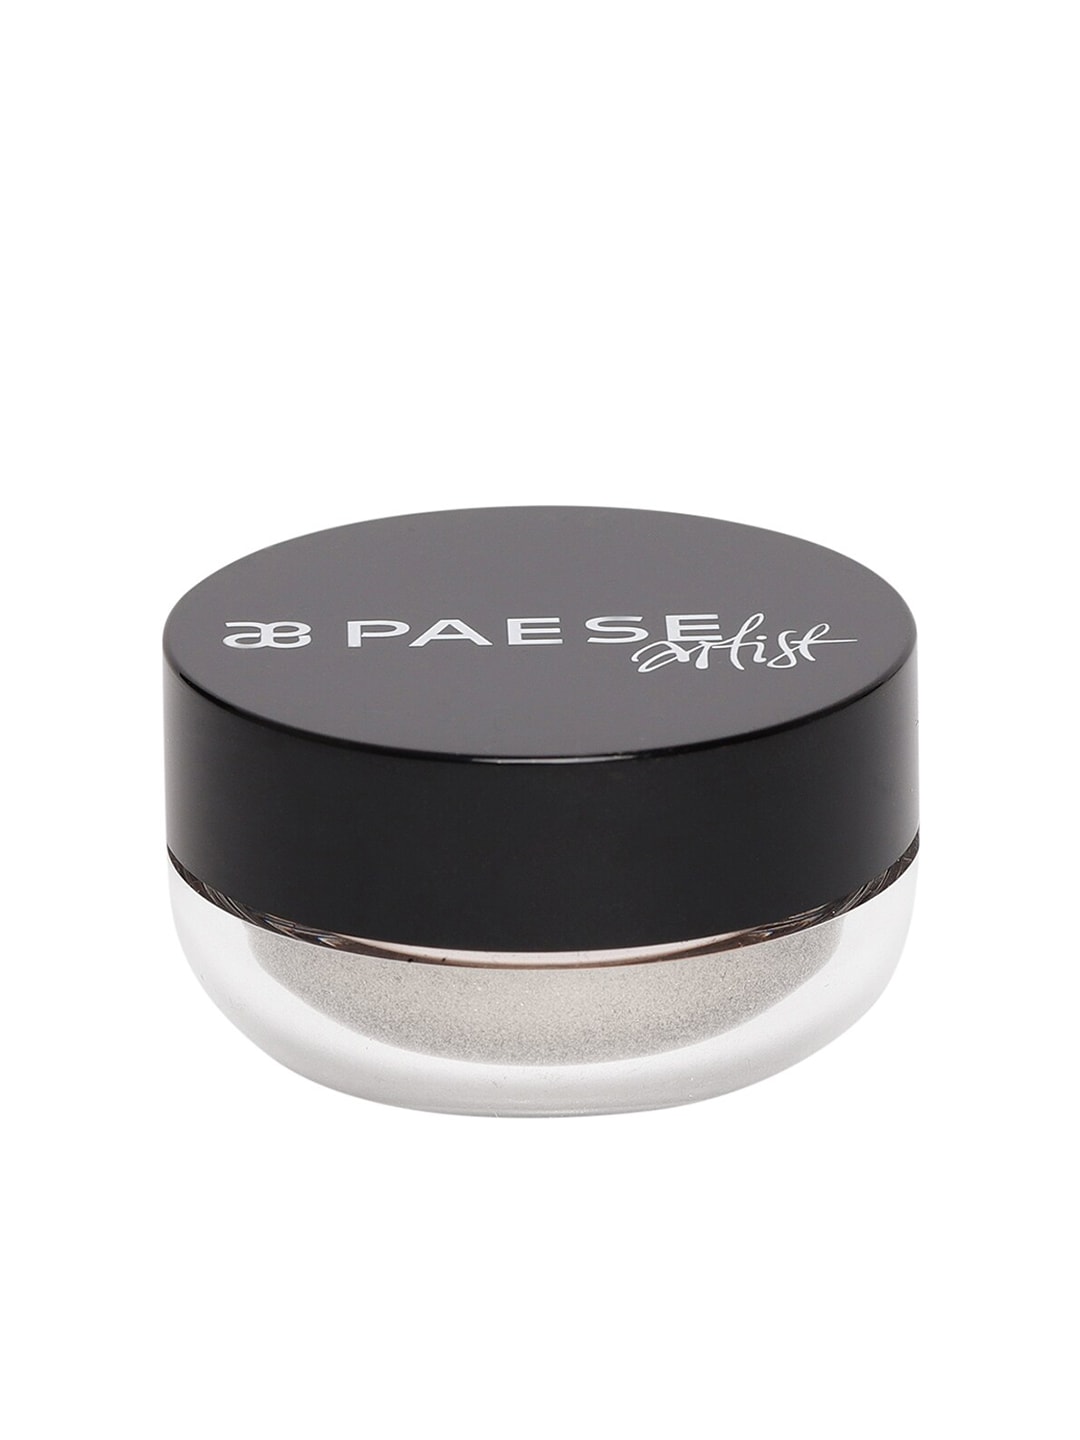 Paese Cosmetics Pure Pigments Eyeshadow - Frozen Sun Price in India